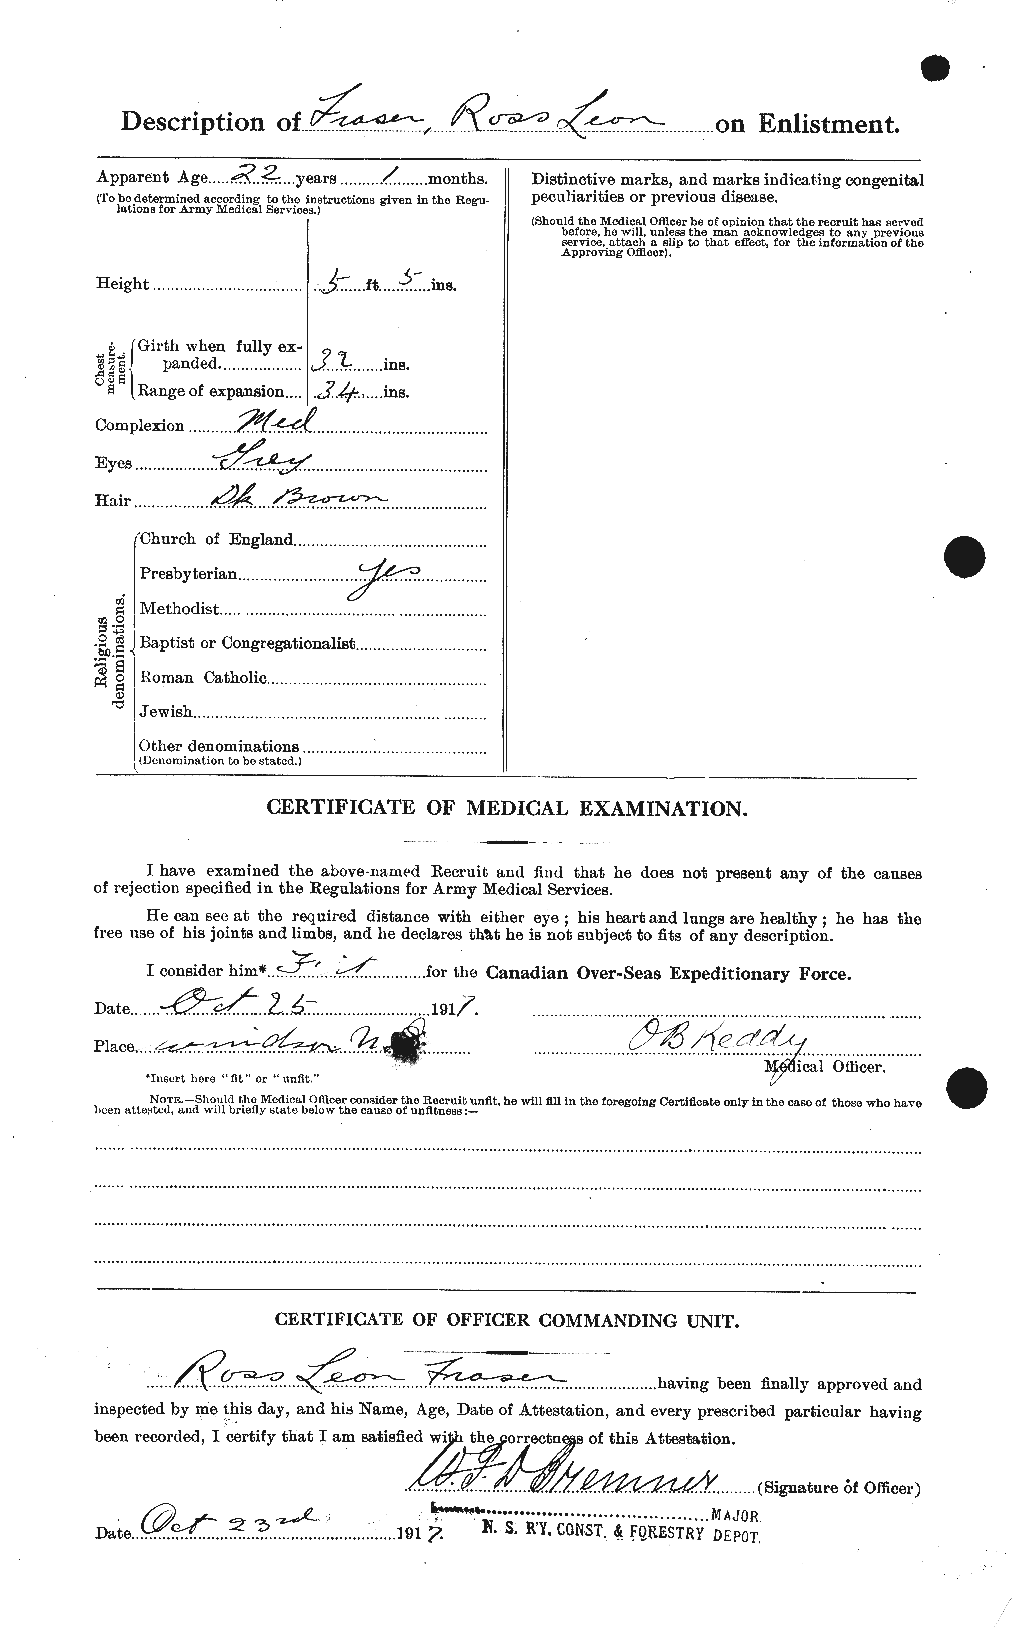 Personnel Records of the First World War - CEF 335703b